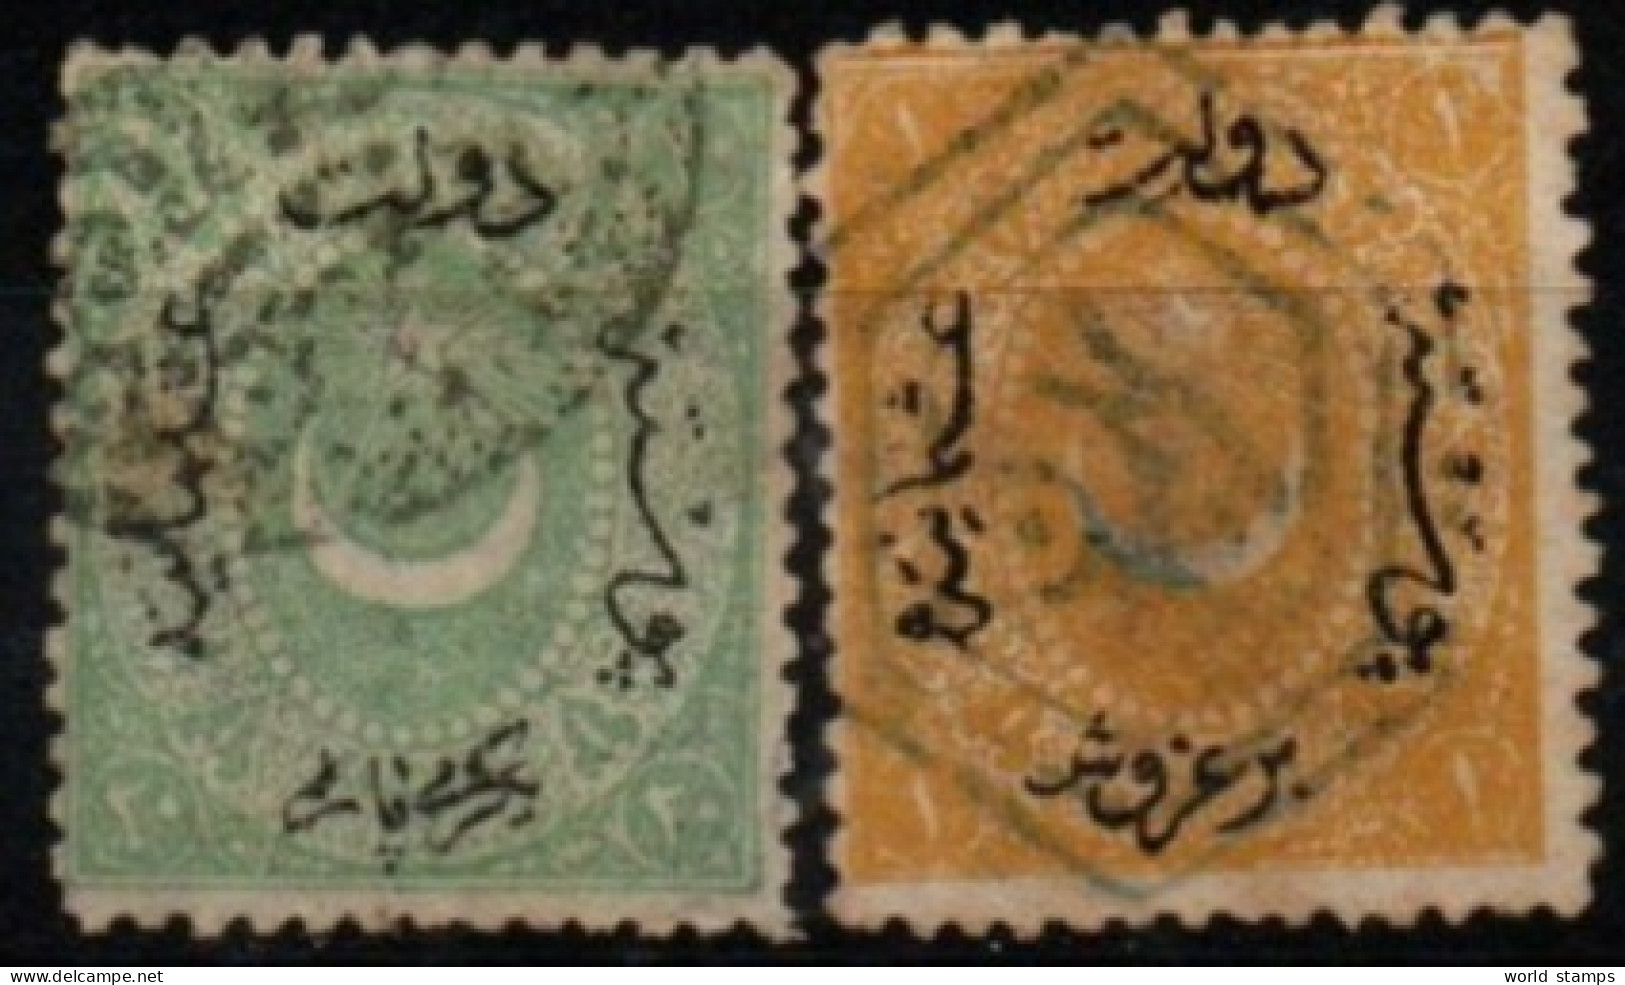 TURQUIE 1869-73 O - Used Stamps